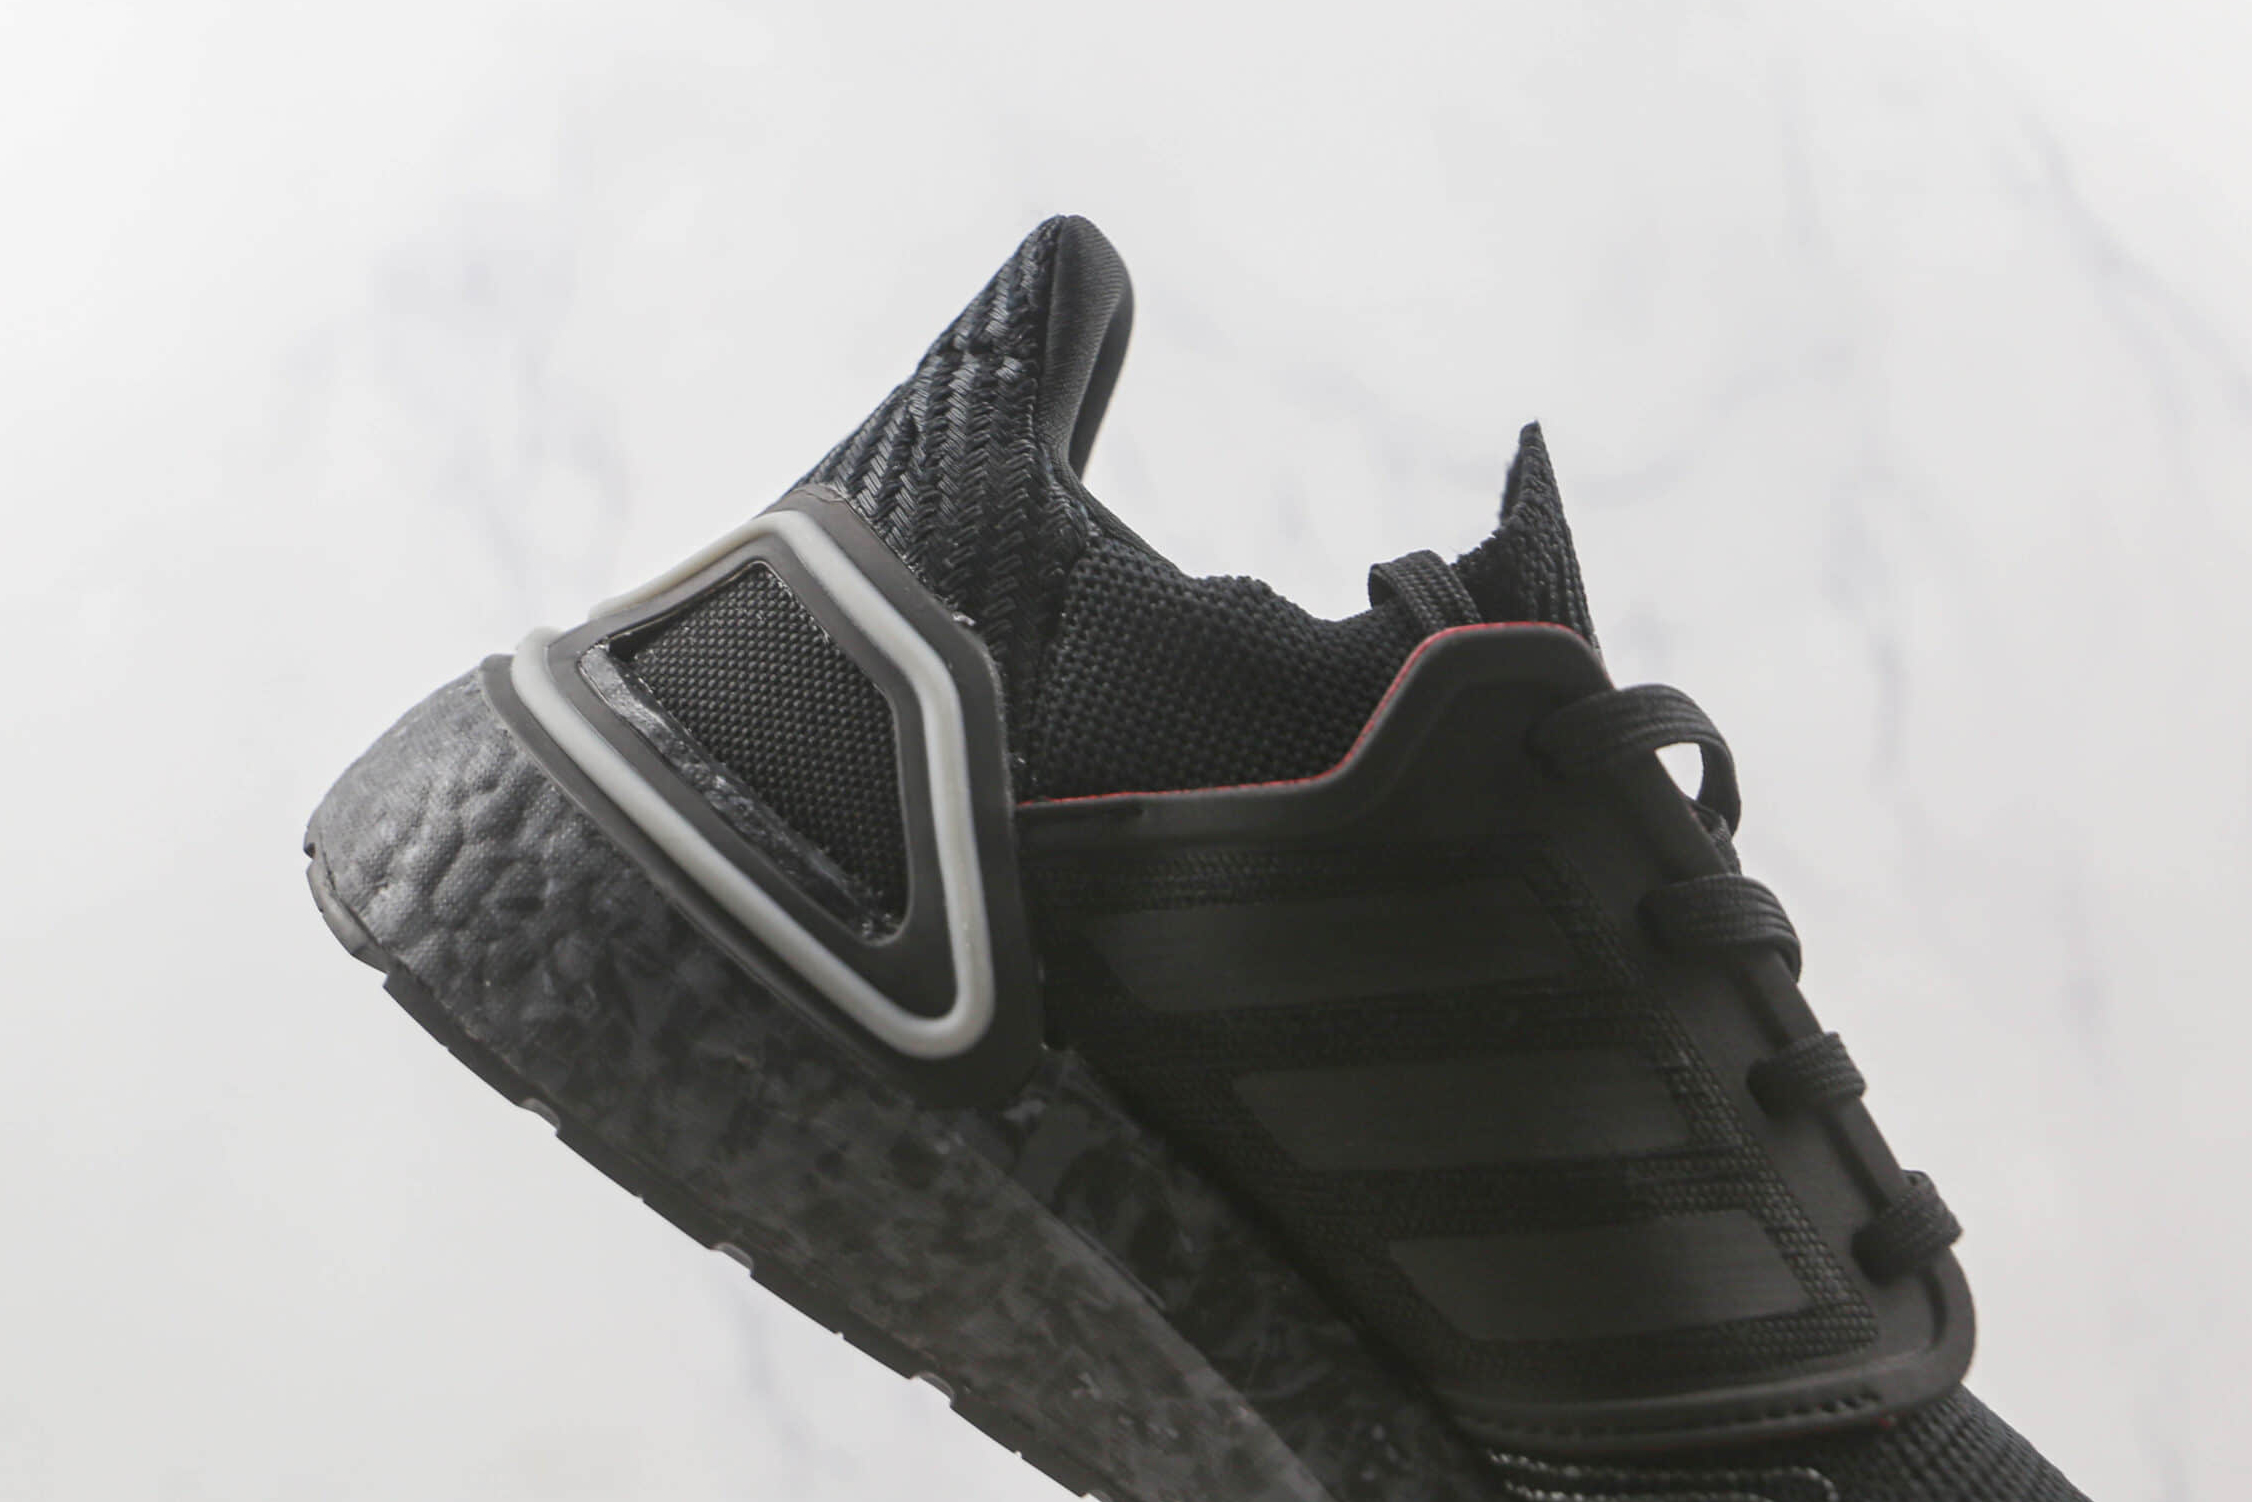 Adidas James Bond x UltraBoost 20 'No Time To Die' - Core Black [FY0646]